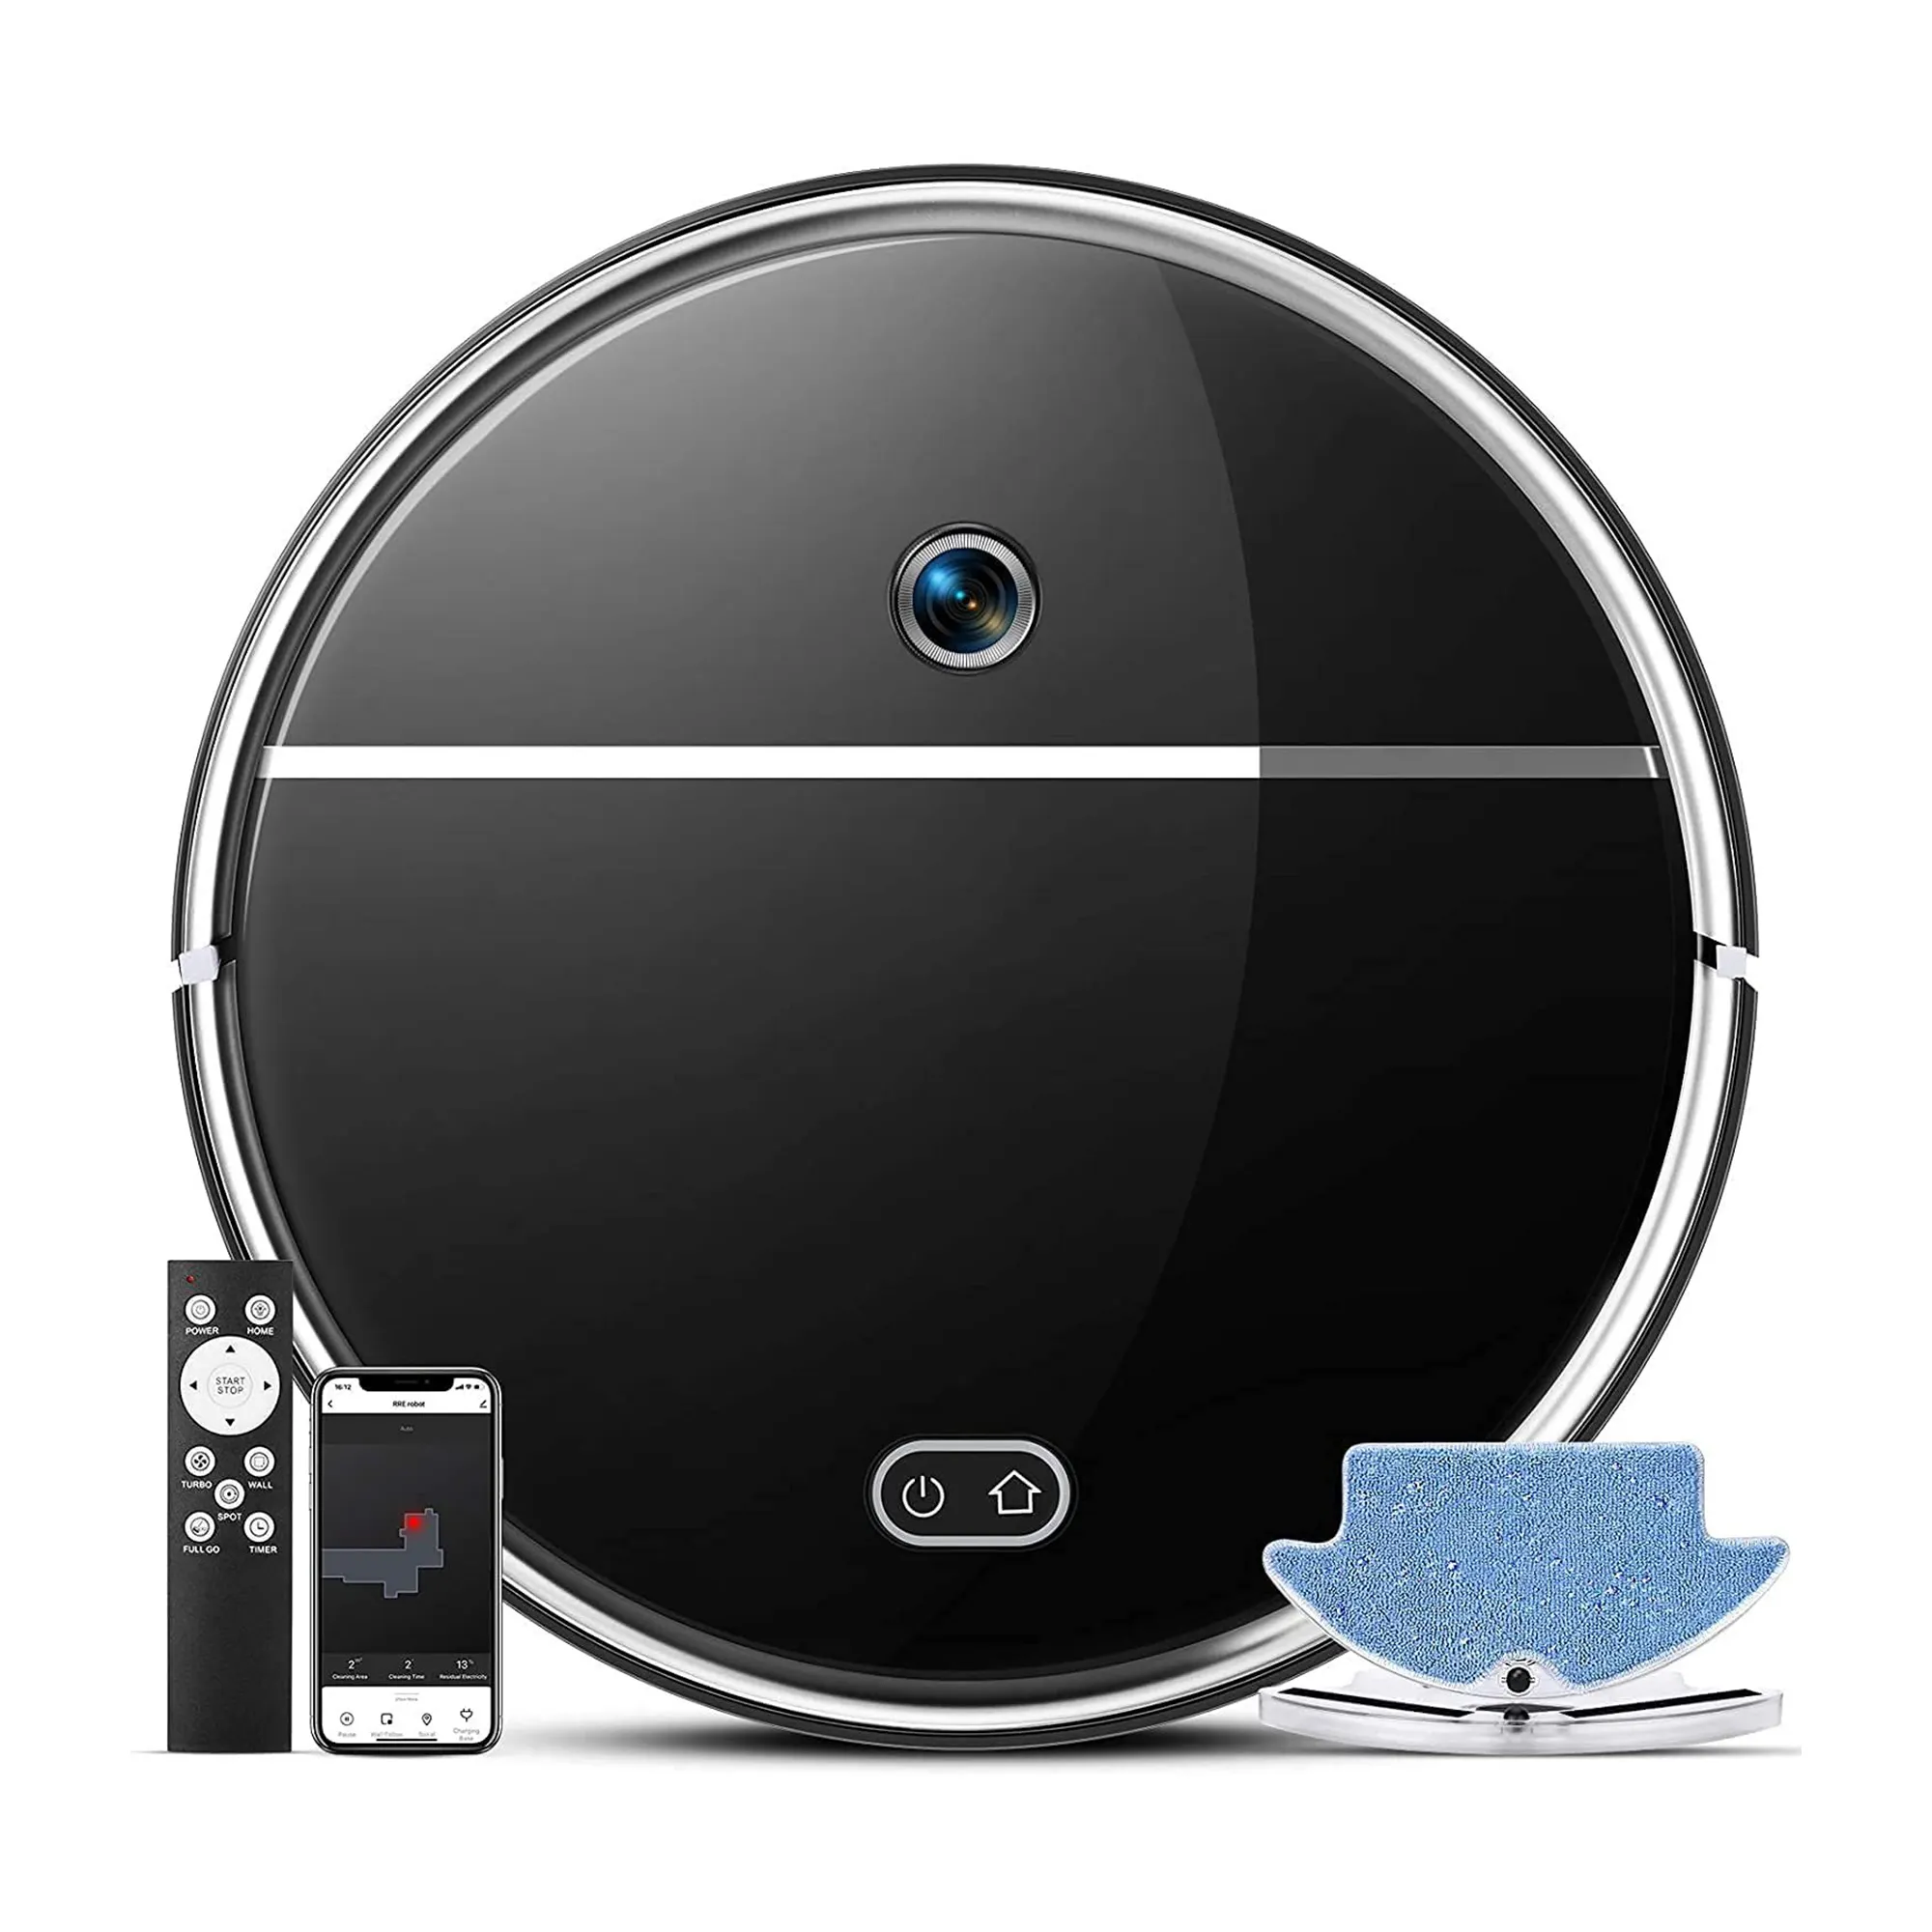 Intelligent Self Cleaning Robot Vacuum Cleaner With Mopping Function